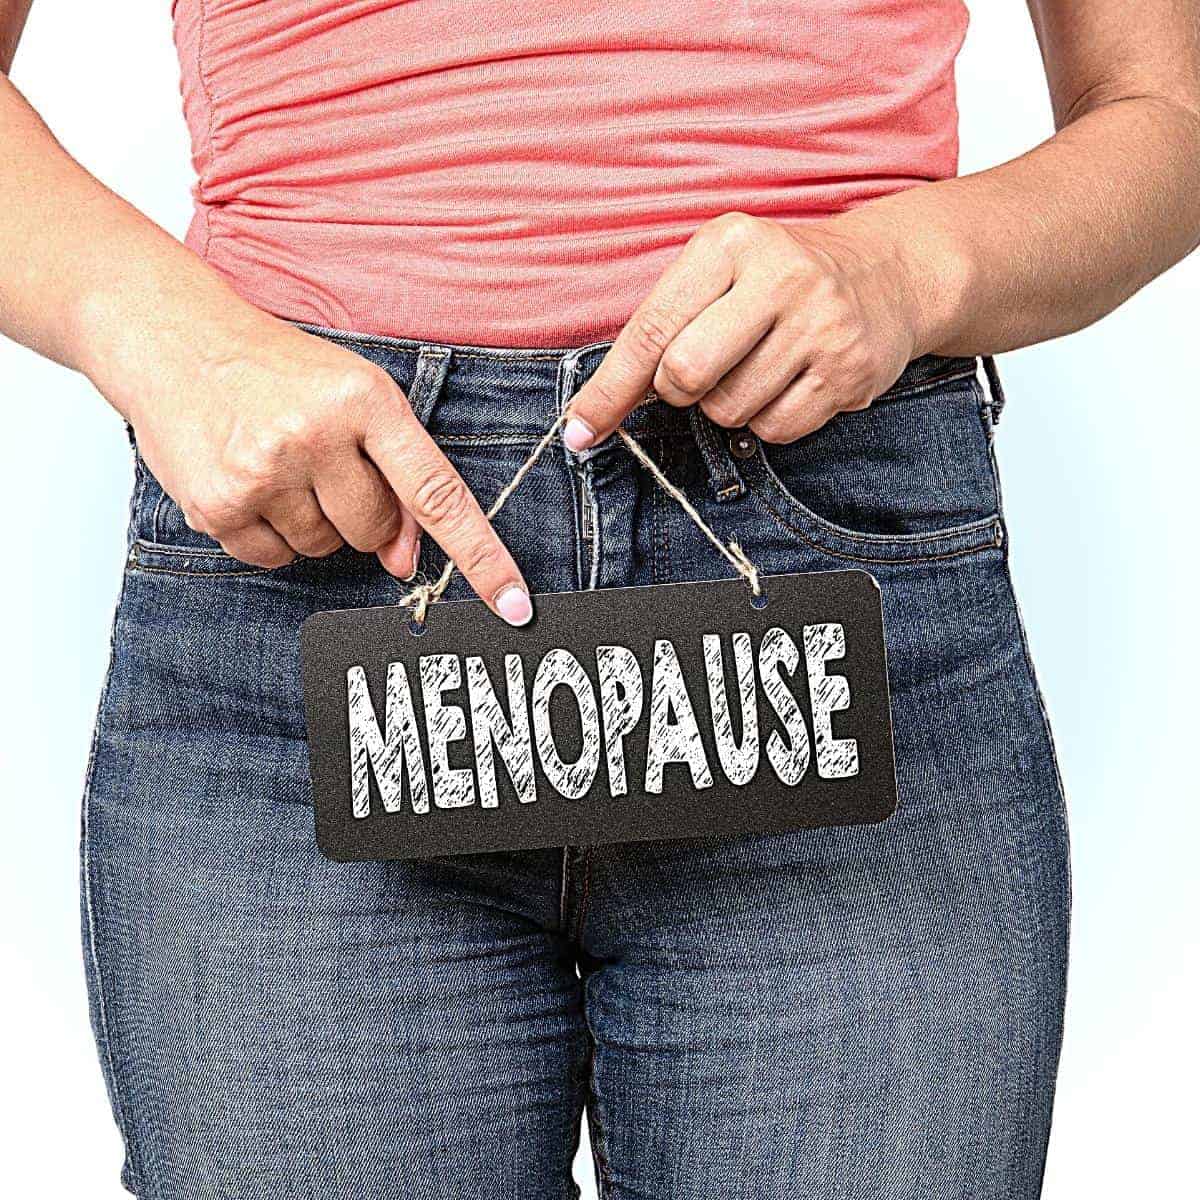 10 things 30 something women need to know about menopause